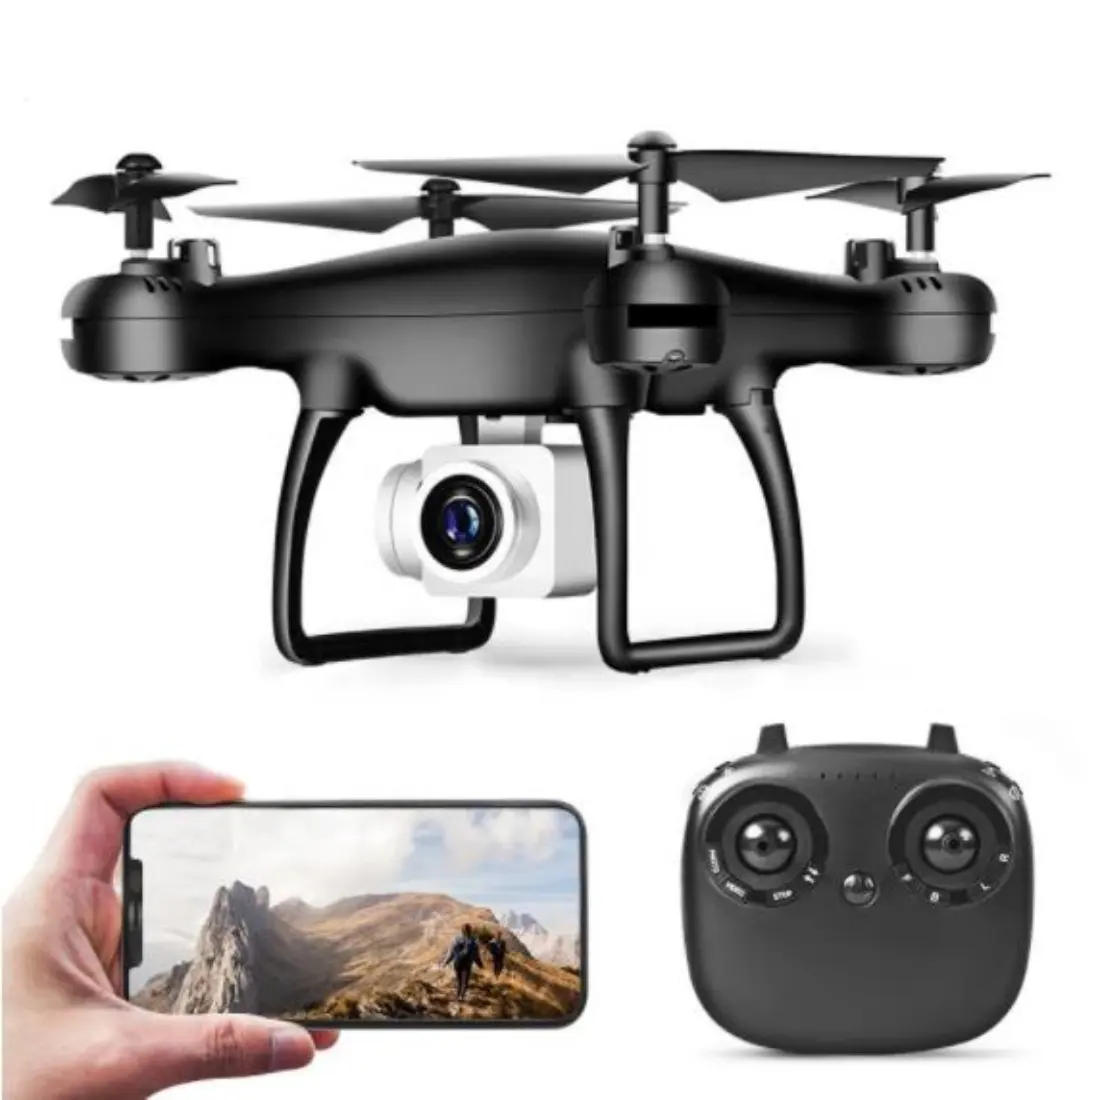 Takenoken Quadcopter Drones with 1080P HD Camera 4K Professional 2.4GHz Anti-Shake Aerial Helicopter RC Aircraft Toy Drones 8S